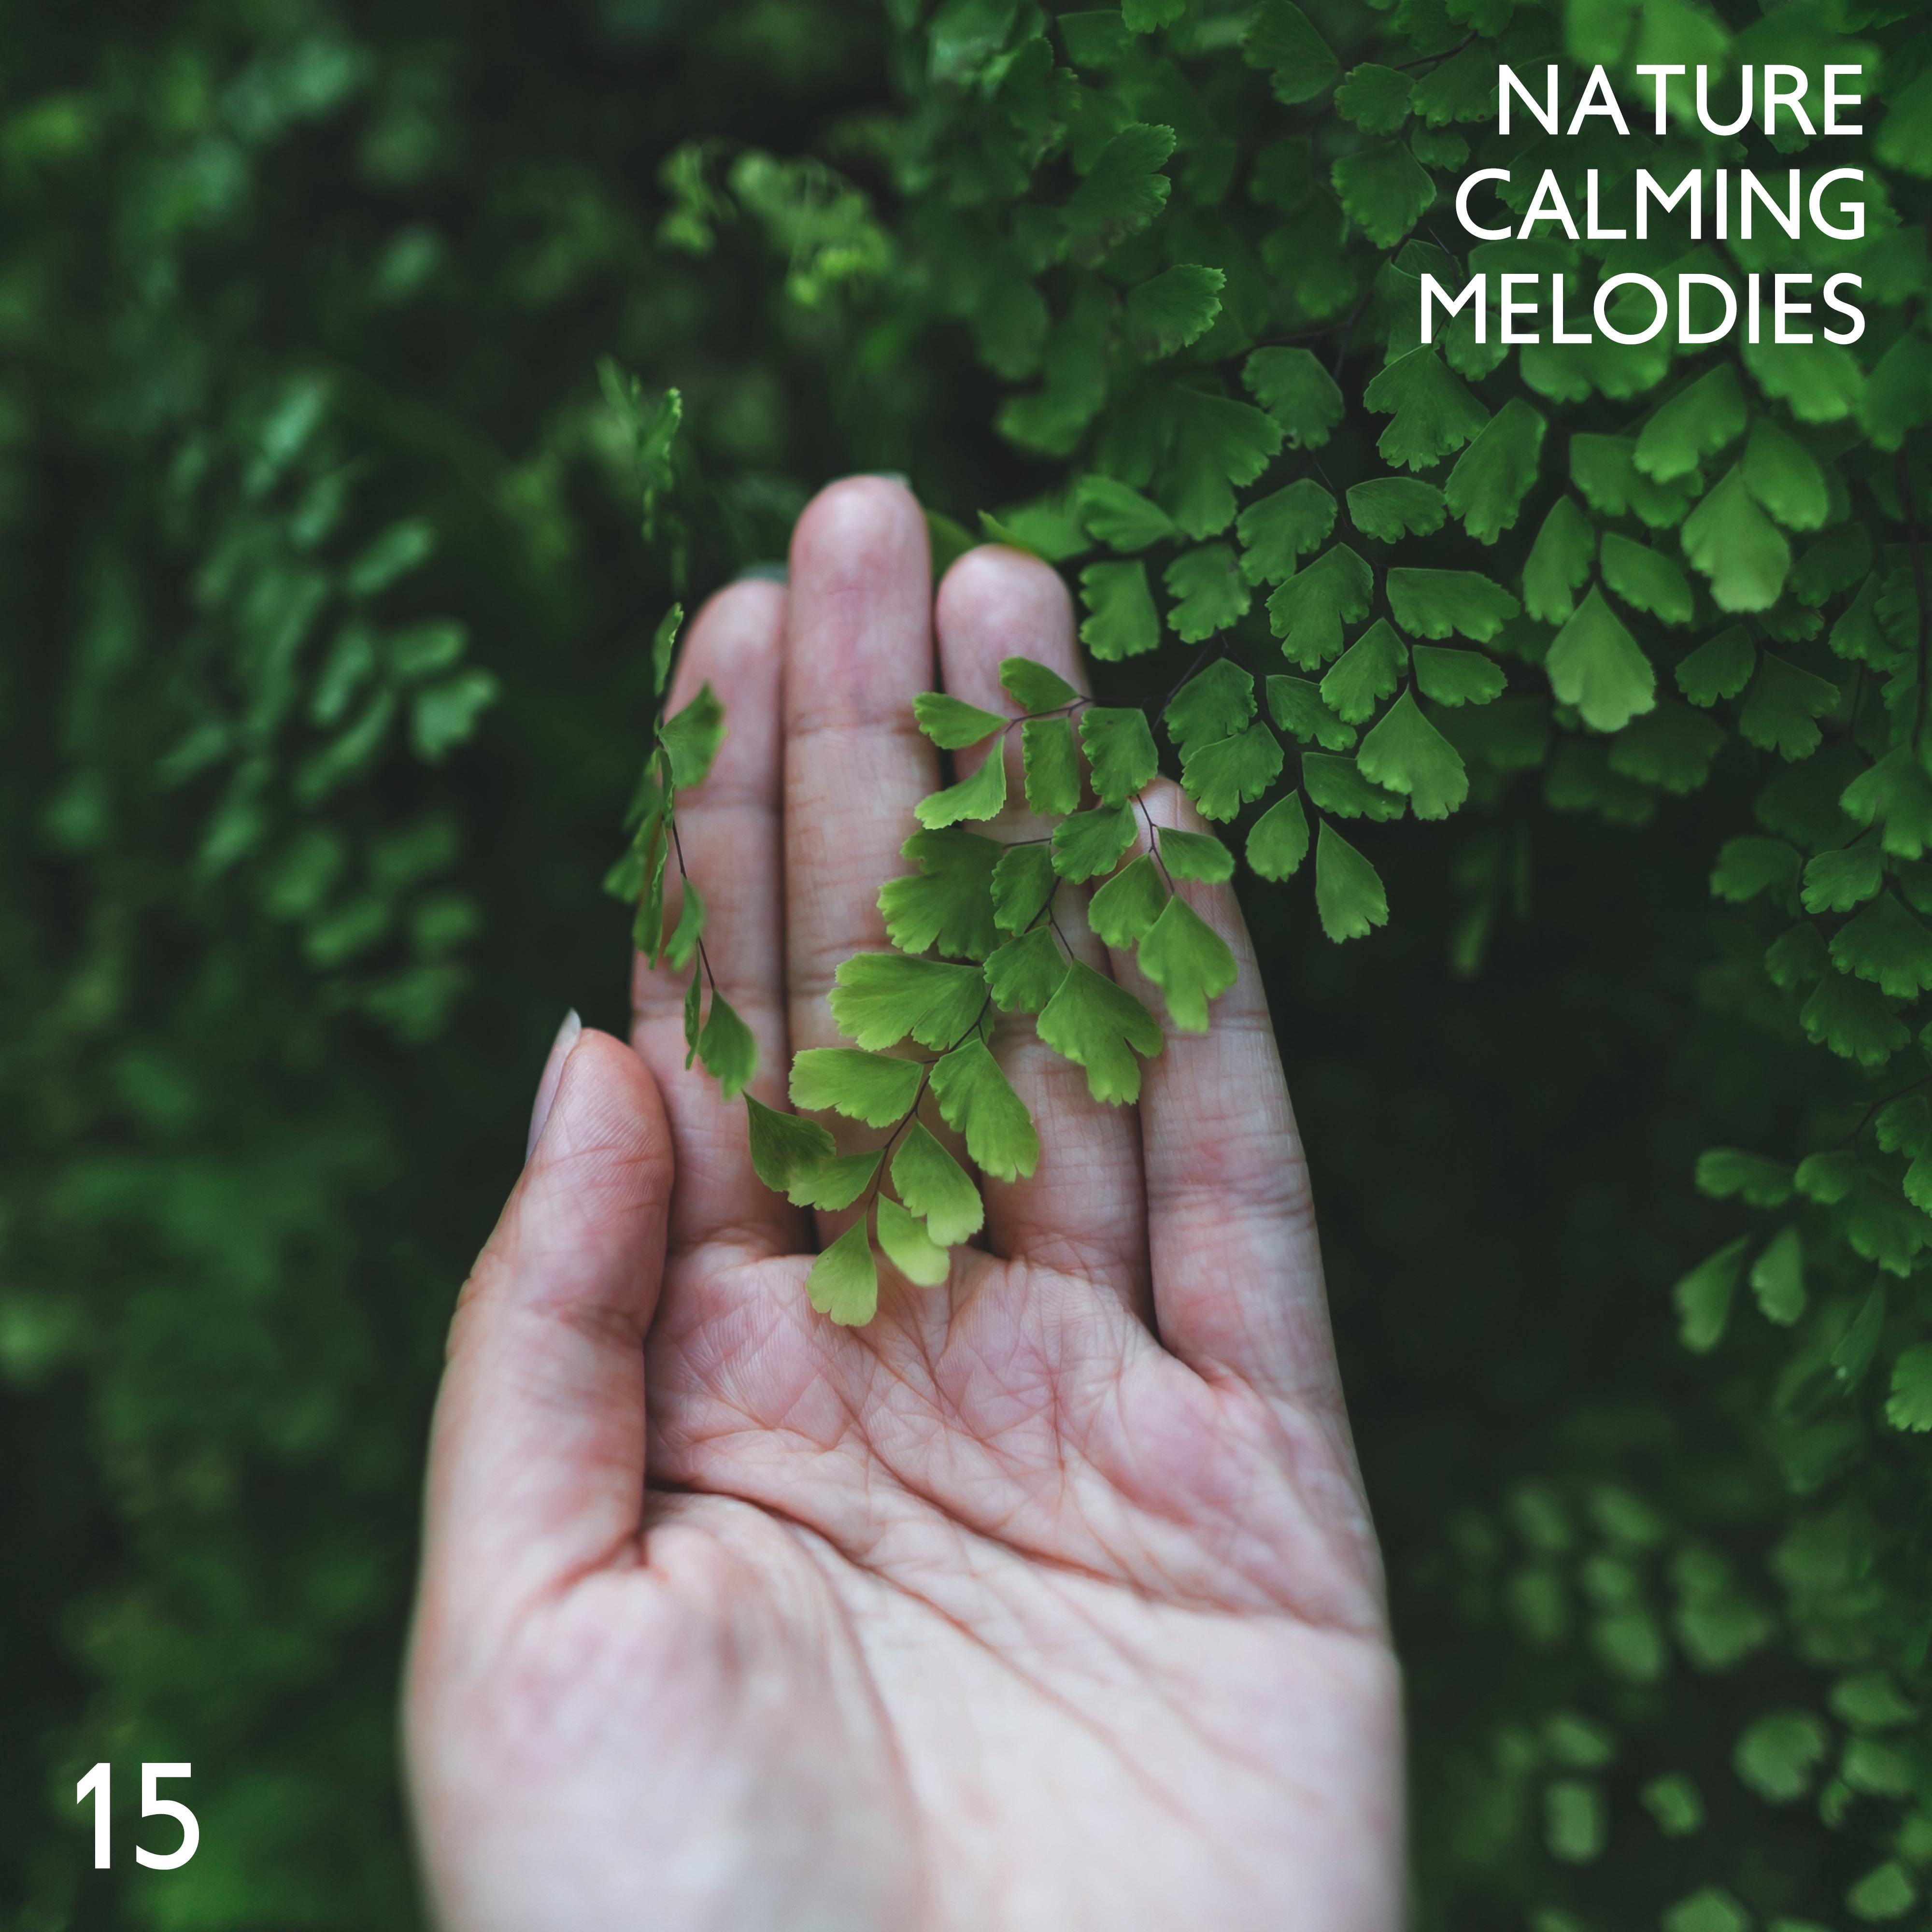 15 Nature Calming Melodies: 2019 New Age Nature Songs for Total Relax & Calming Down, Soothing Forest, Wind, Birds & Water Sounds, Anti Stress Music